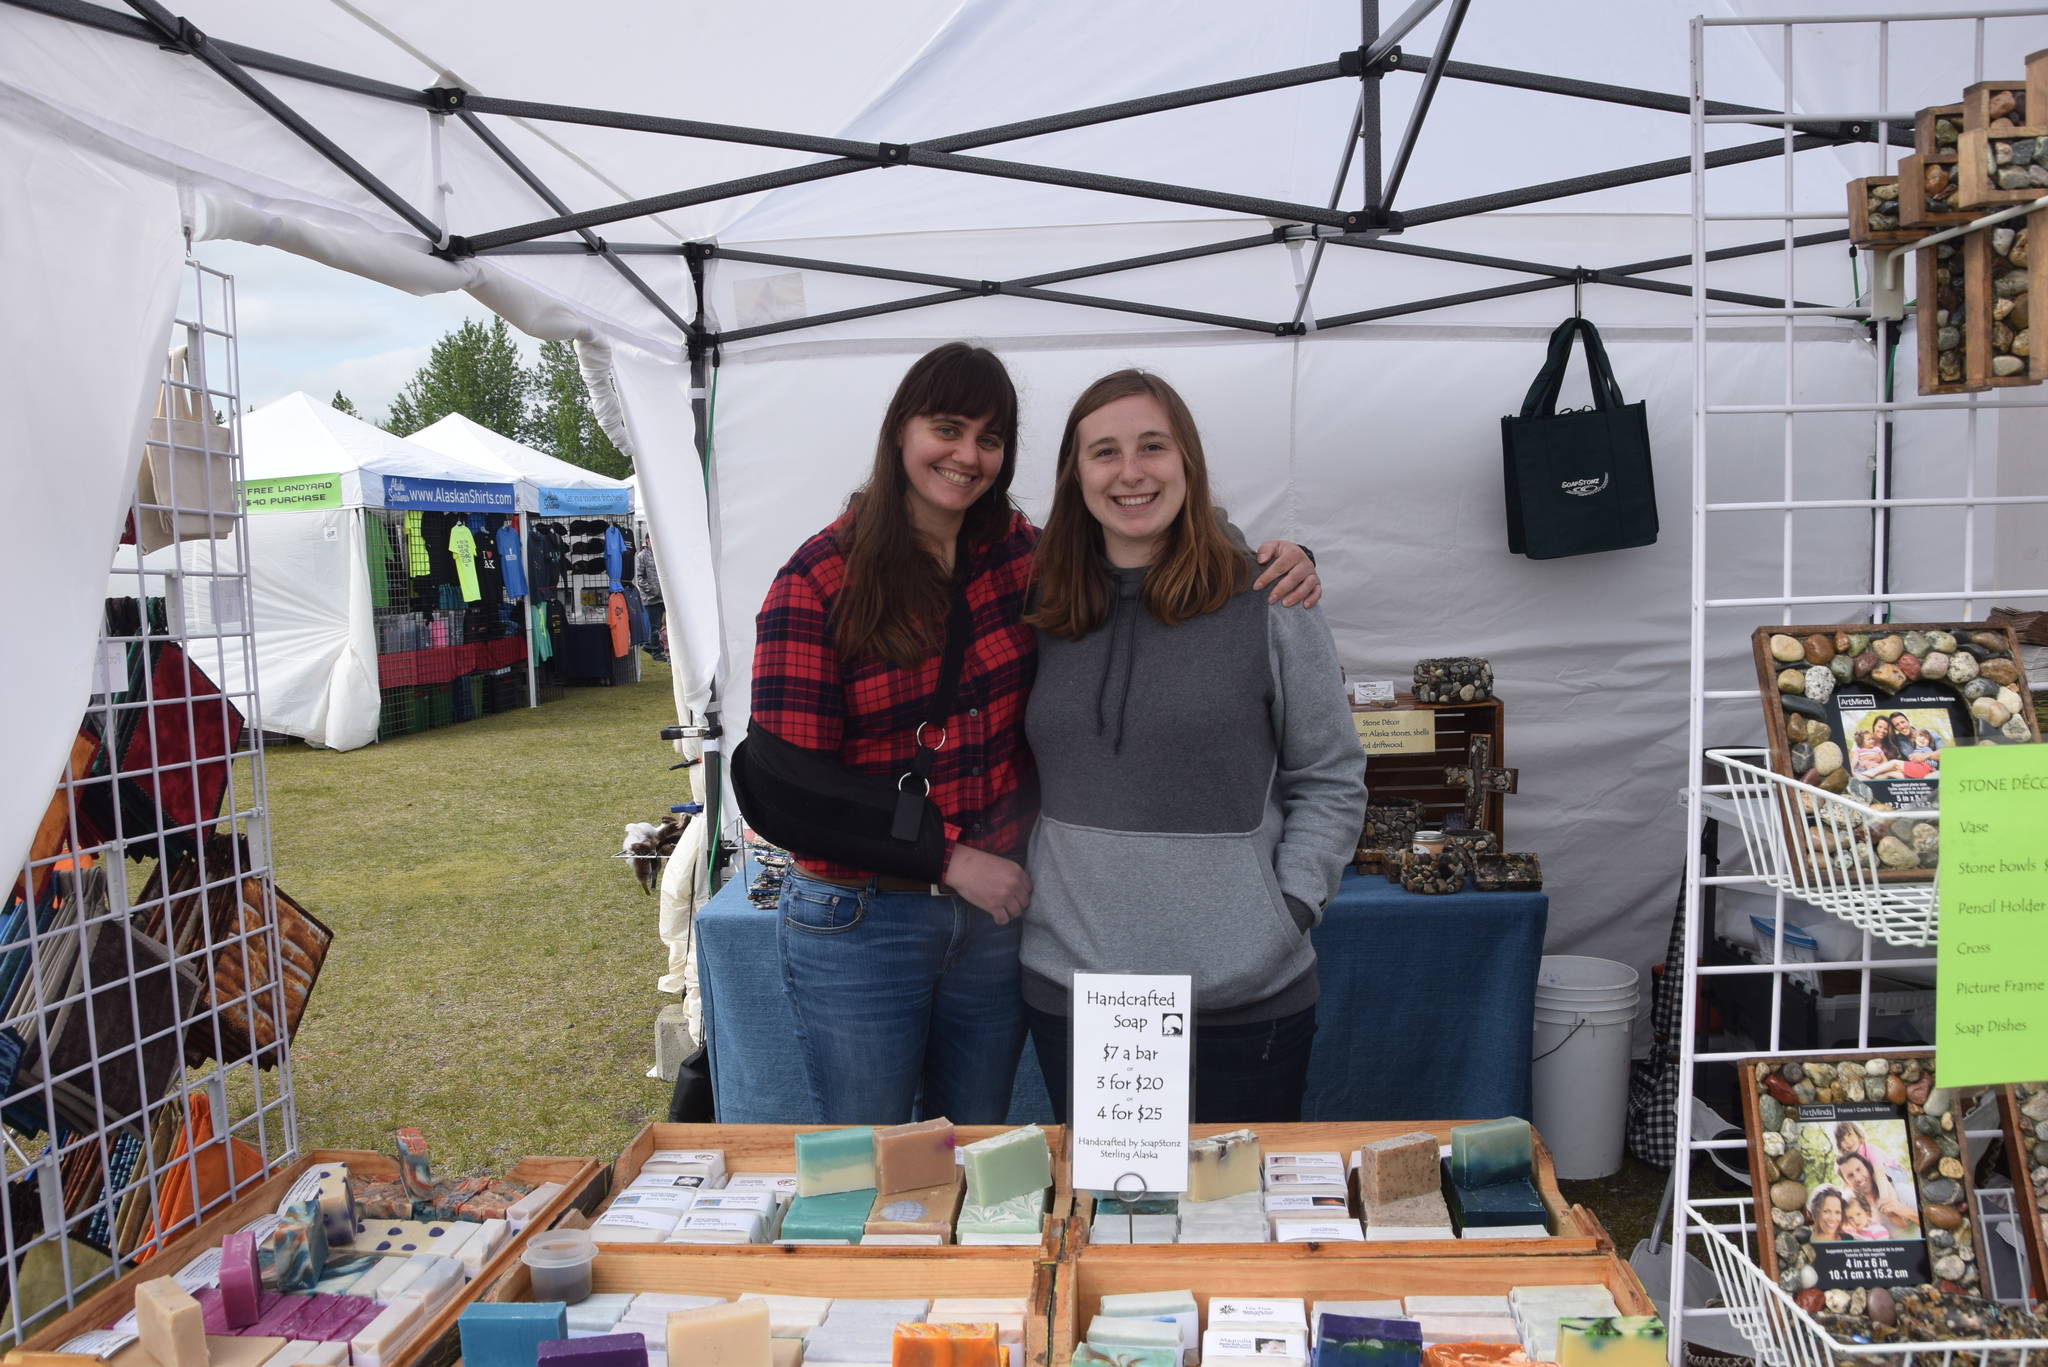 Audra Johnson, left, and Ayanna Carter, right, pose in front of handmade soaps crafted by Carter’s grandparents during the Kenai River Festival at Soldotna Creek Park in Soldotna, Alaska on June 8, 2019. (Photo by Brian Mazurek/Peninsula Clarion)